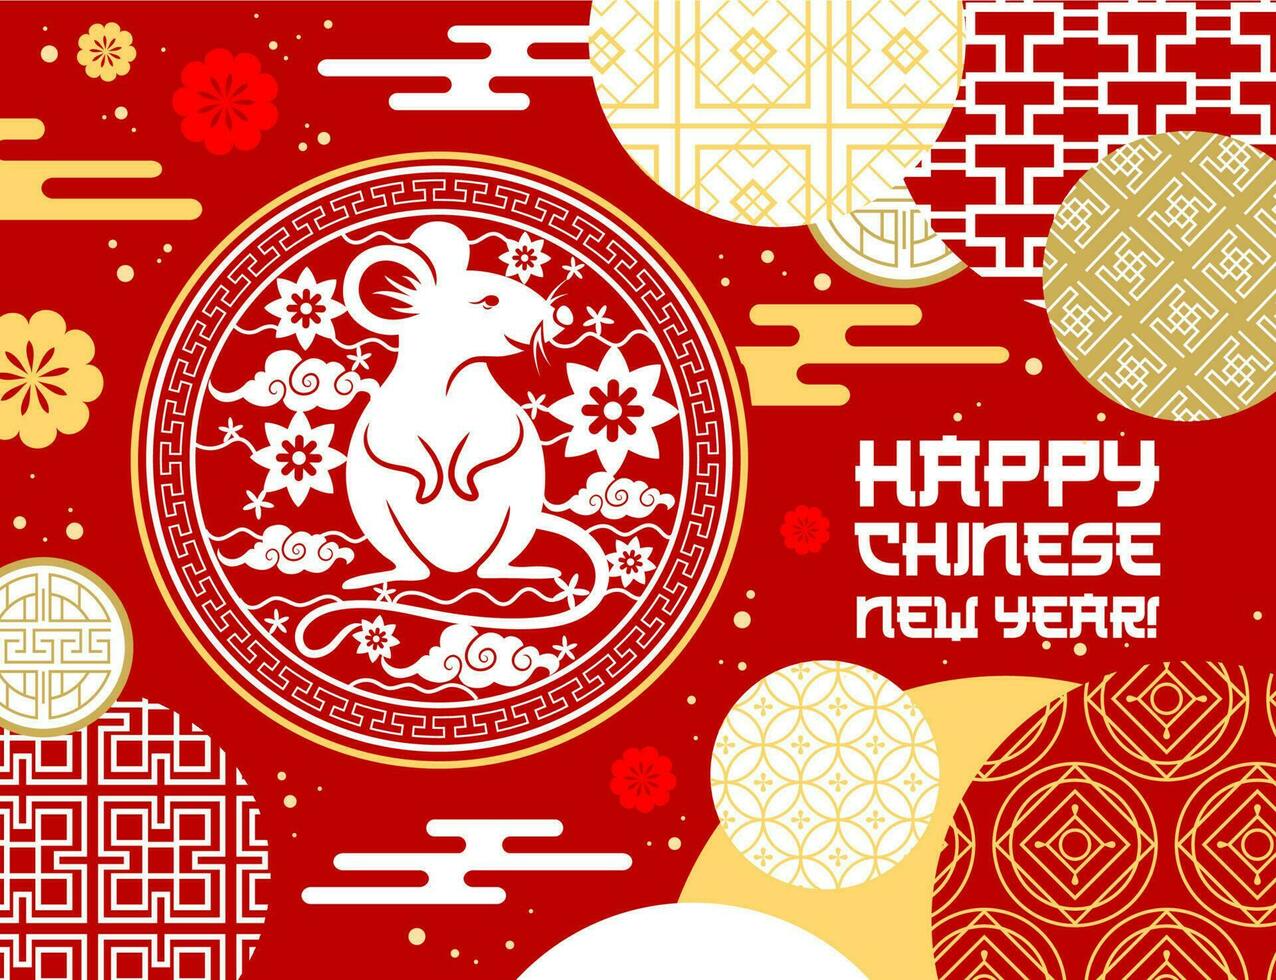 Chinese animal zodiac rat card of Lunar New Year vector